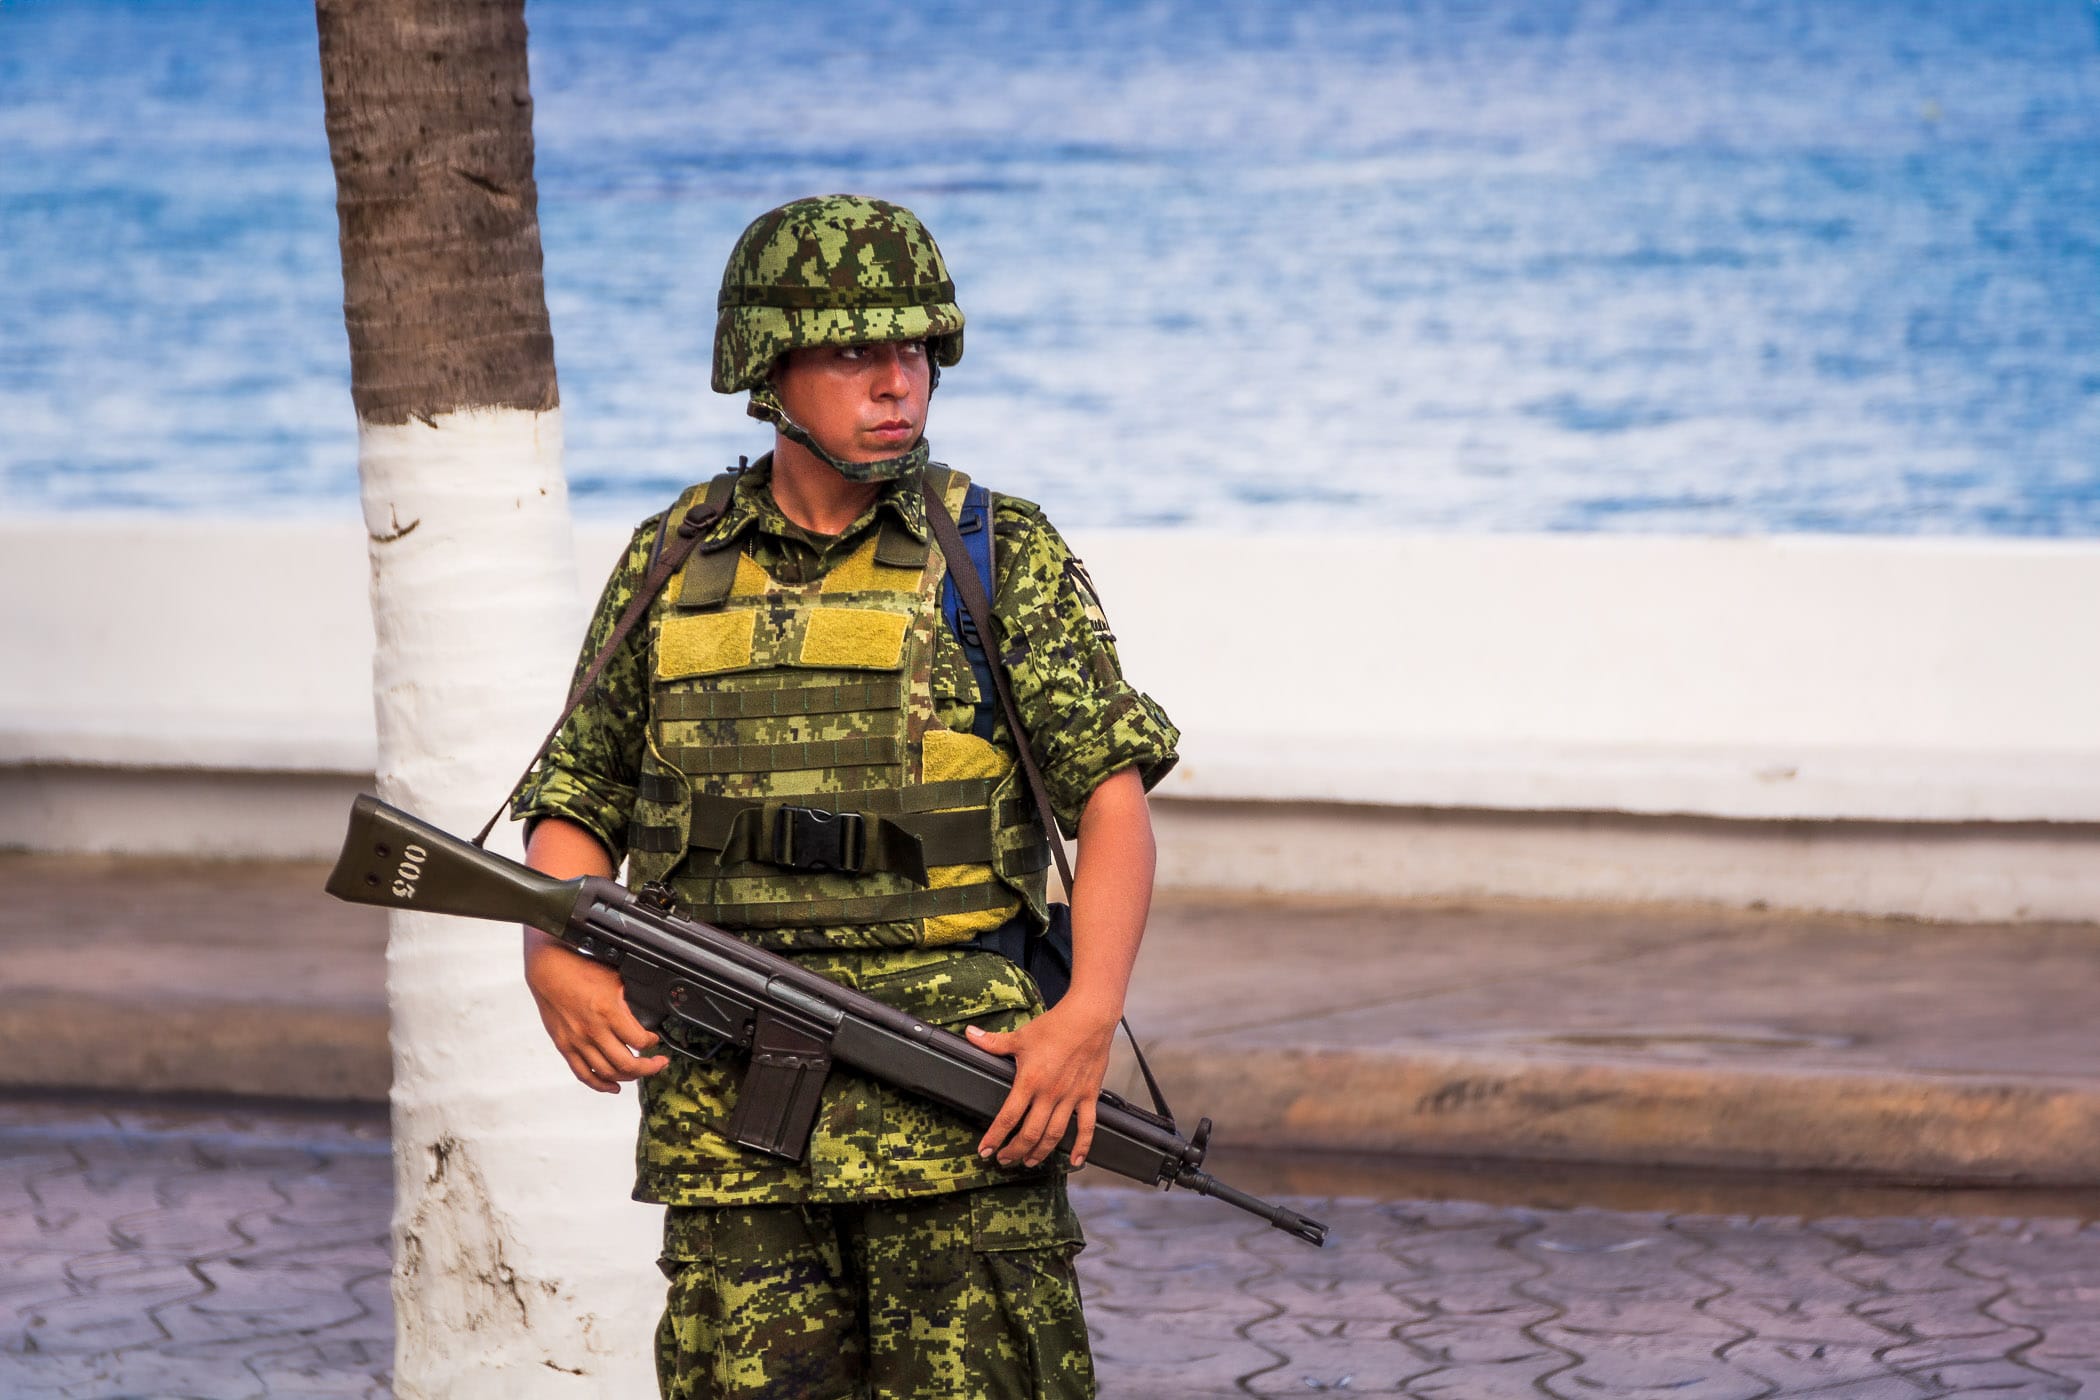 A soldier keeps watch in San Miguel, Cozumel, Mexico.